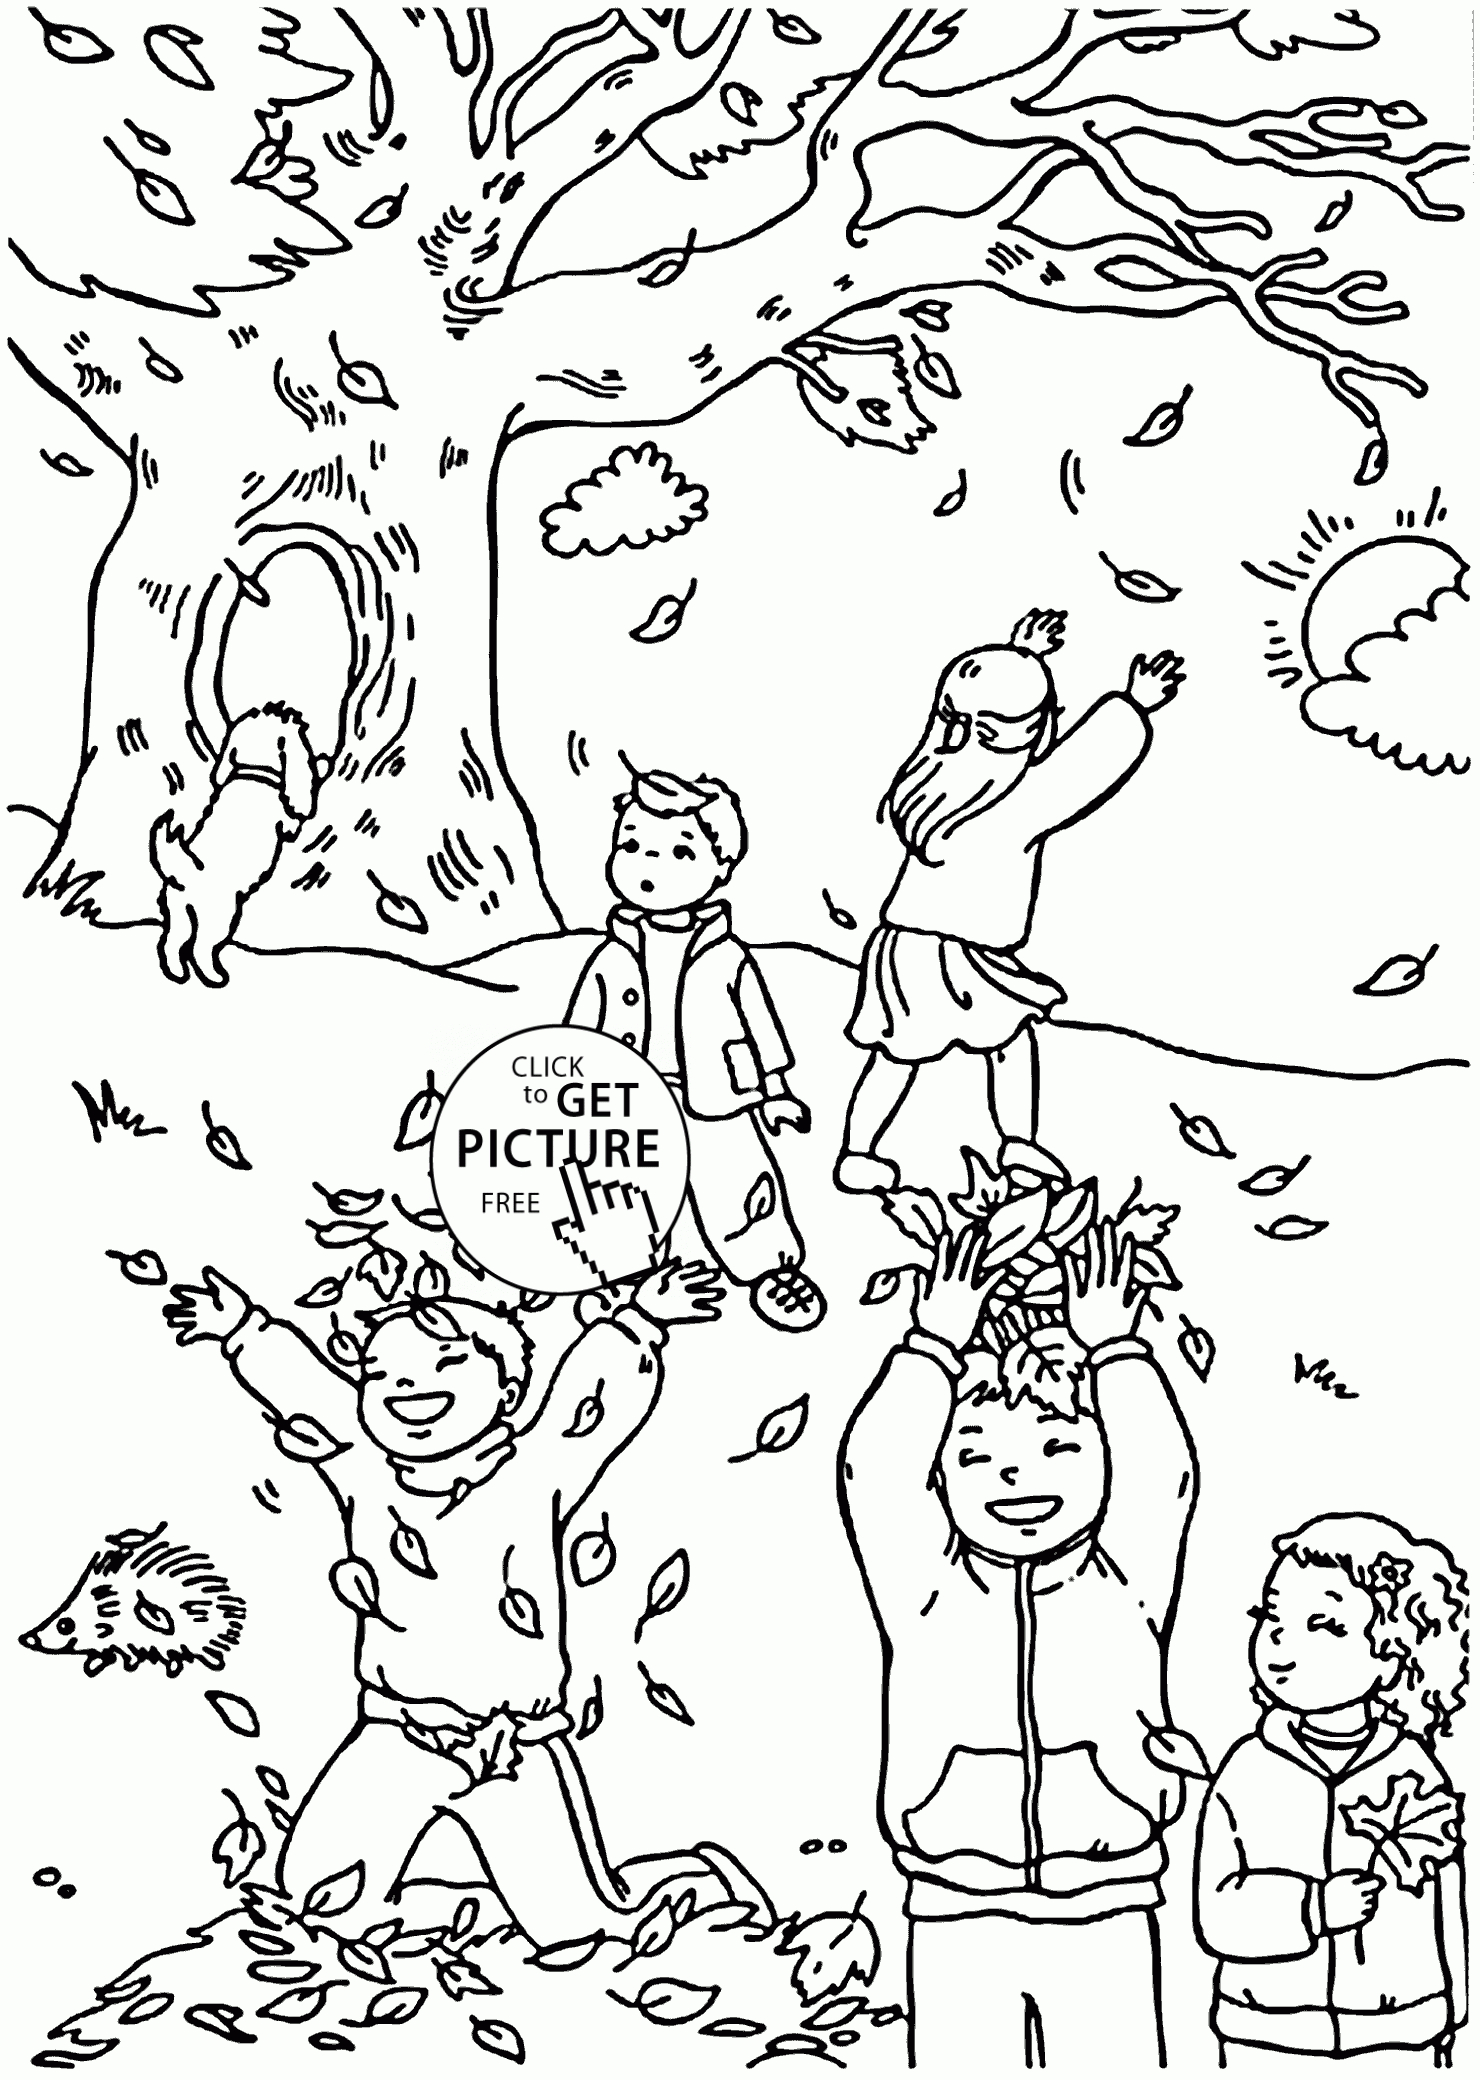 Funny Fall Coloring Pages For Kids, Autumn Leaves Printables Free - Free Printable Fall Coloring Pages